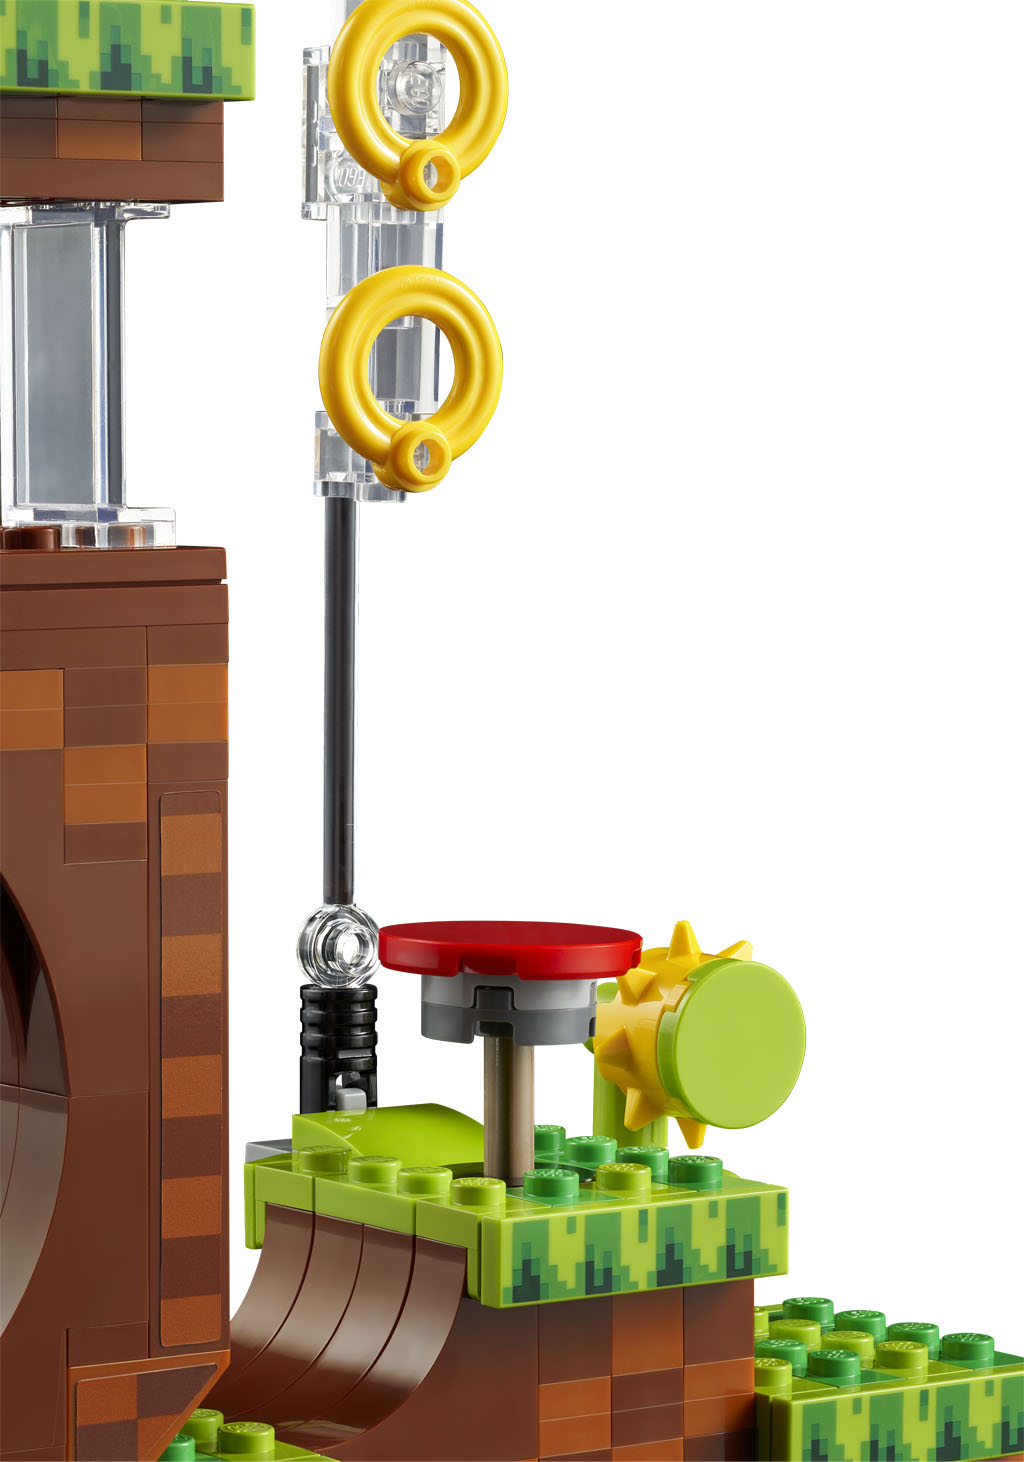 LEGO IDEAS - Blog - LEGO Ideas 21331 Sonic the Hedgehog™ Green Hill Zone -  Now Available